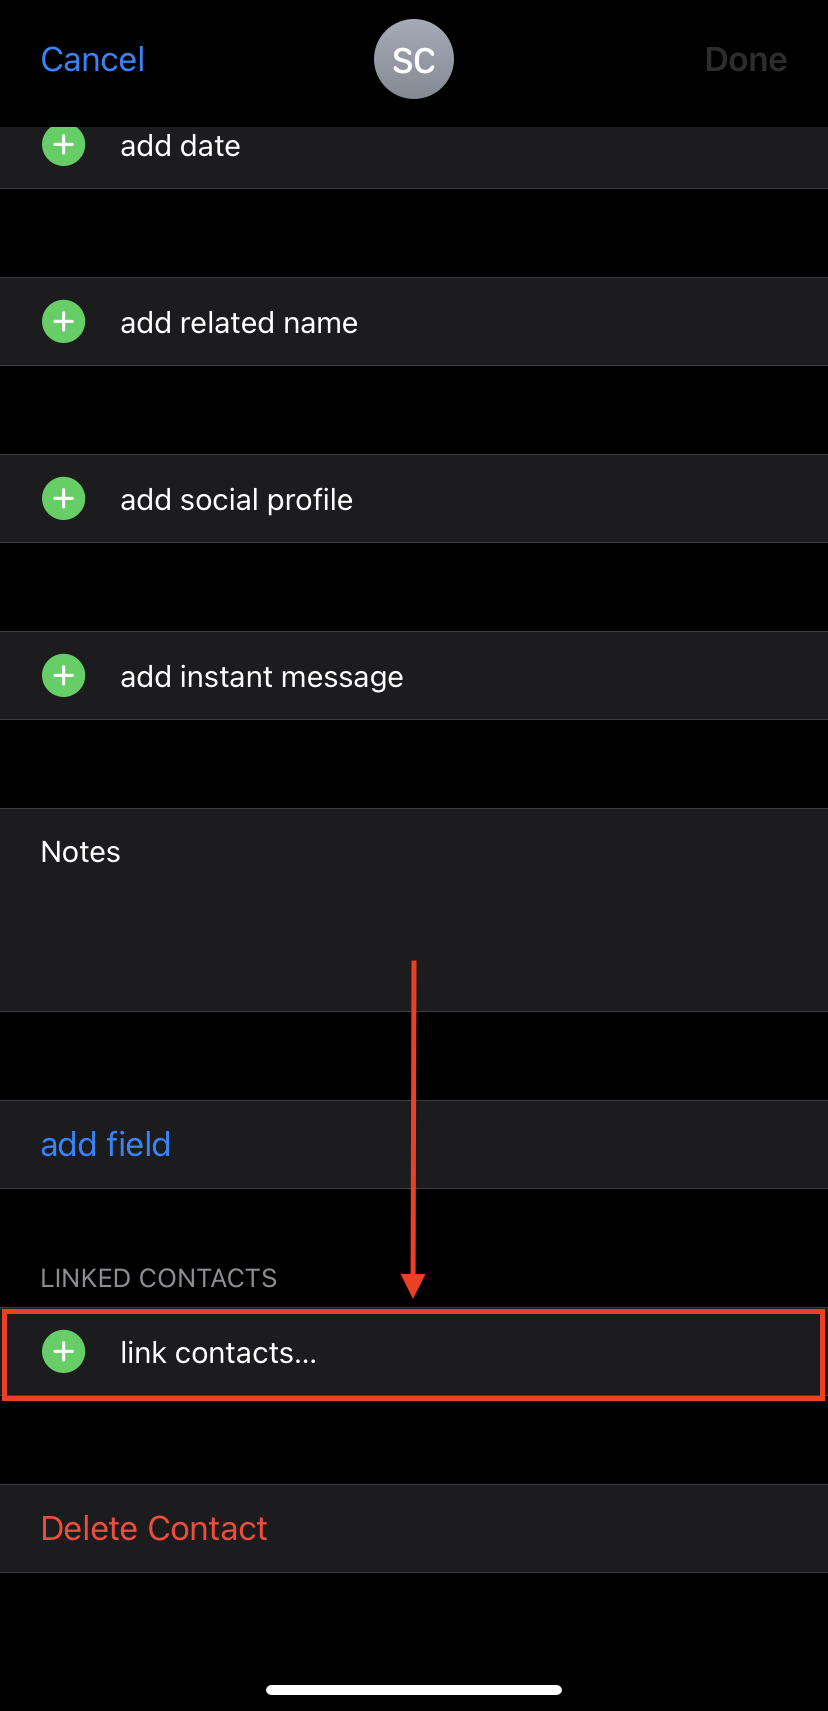 Link Contacts button in the iPhone's Contacts app